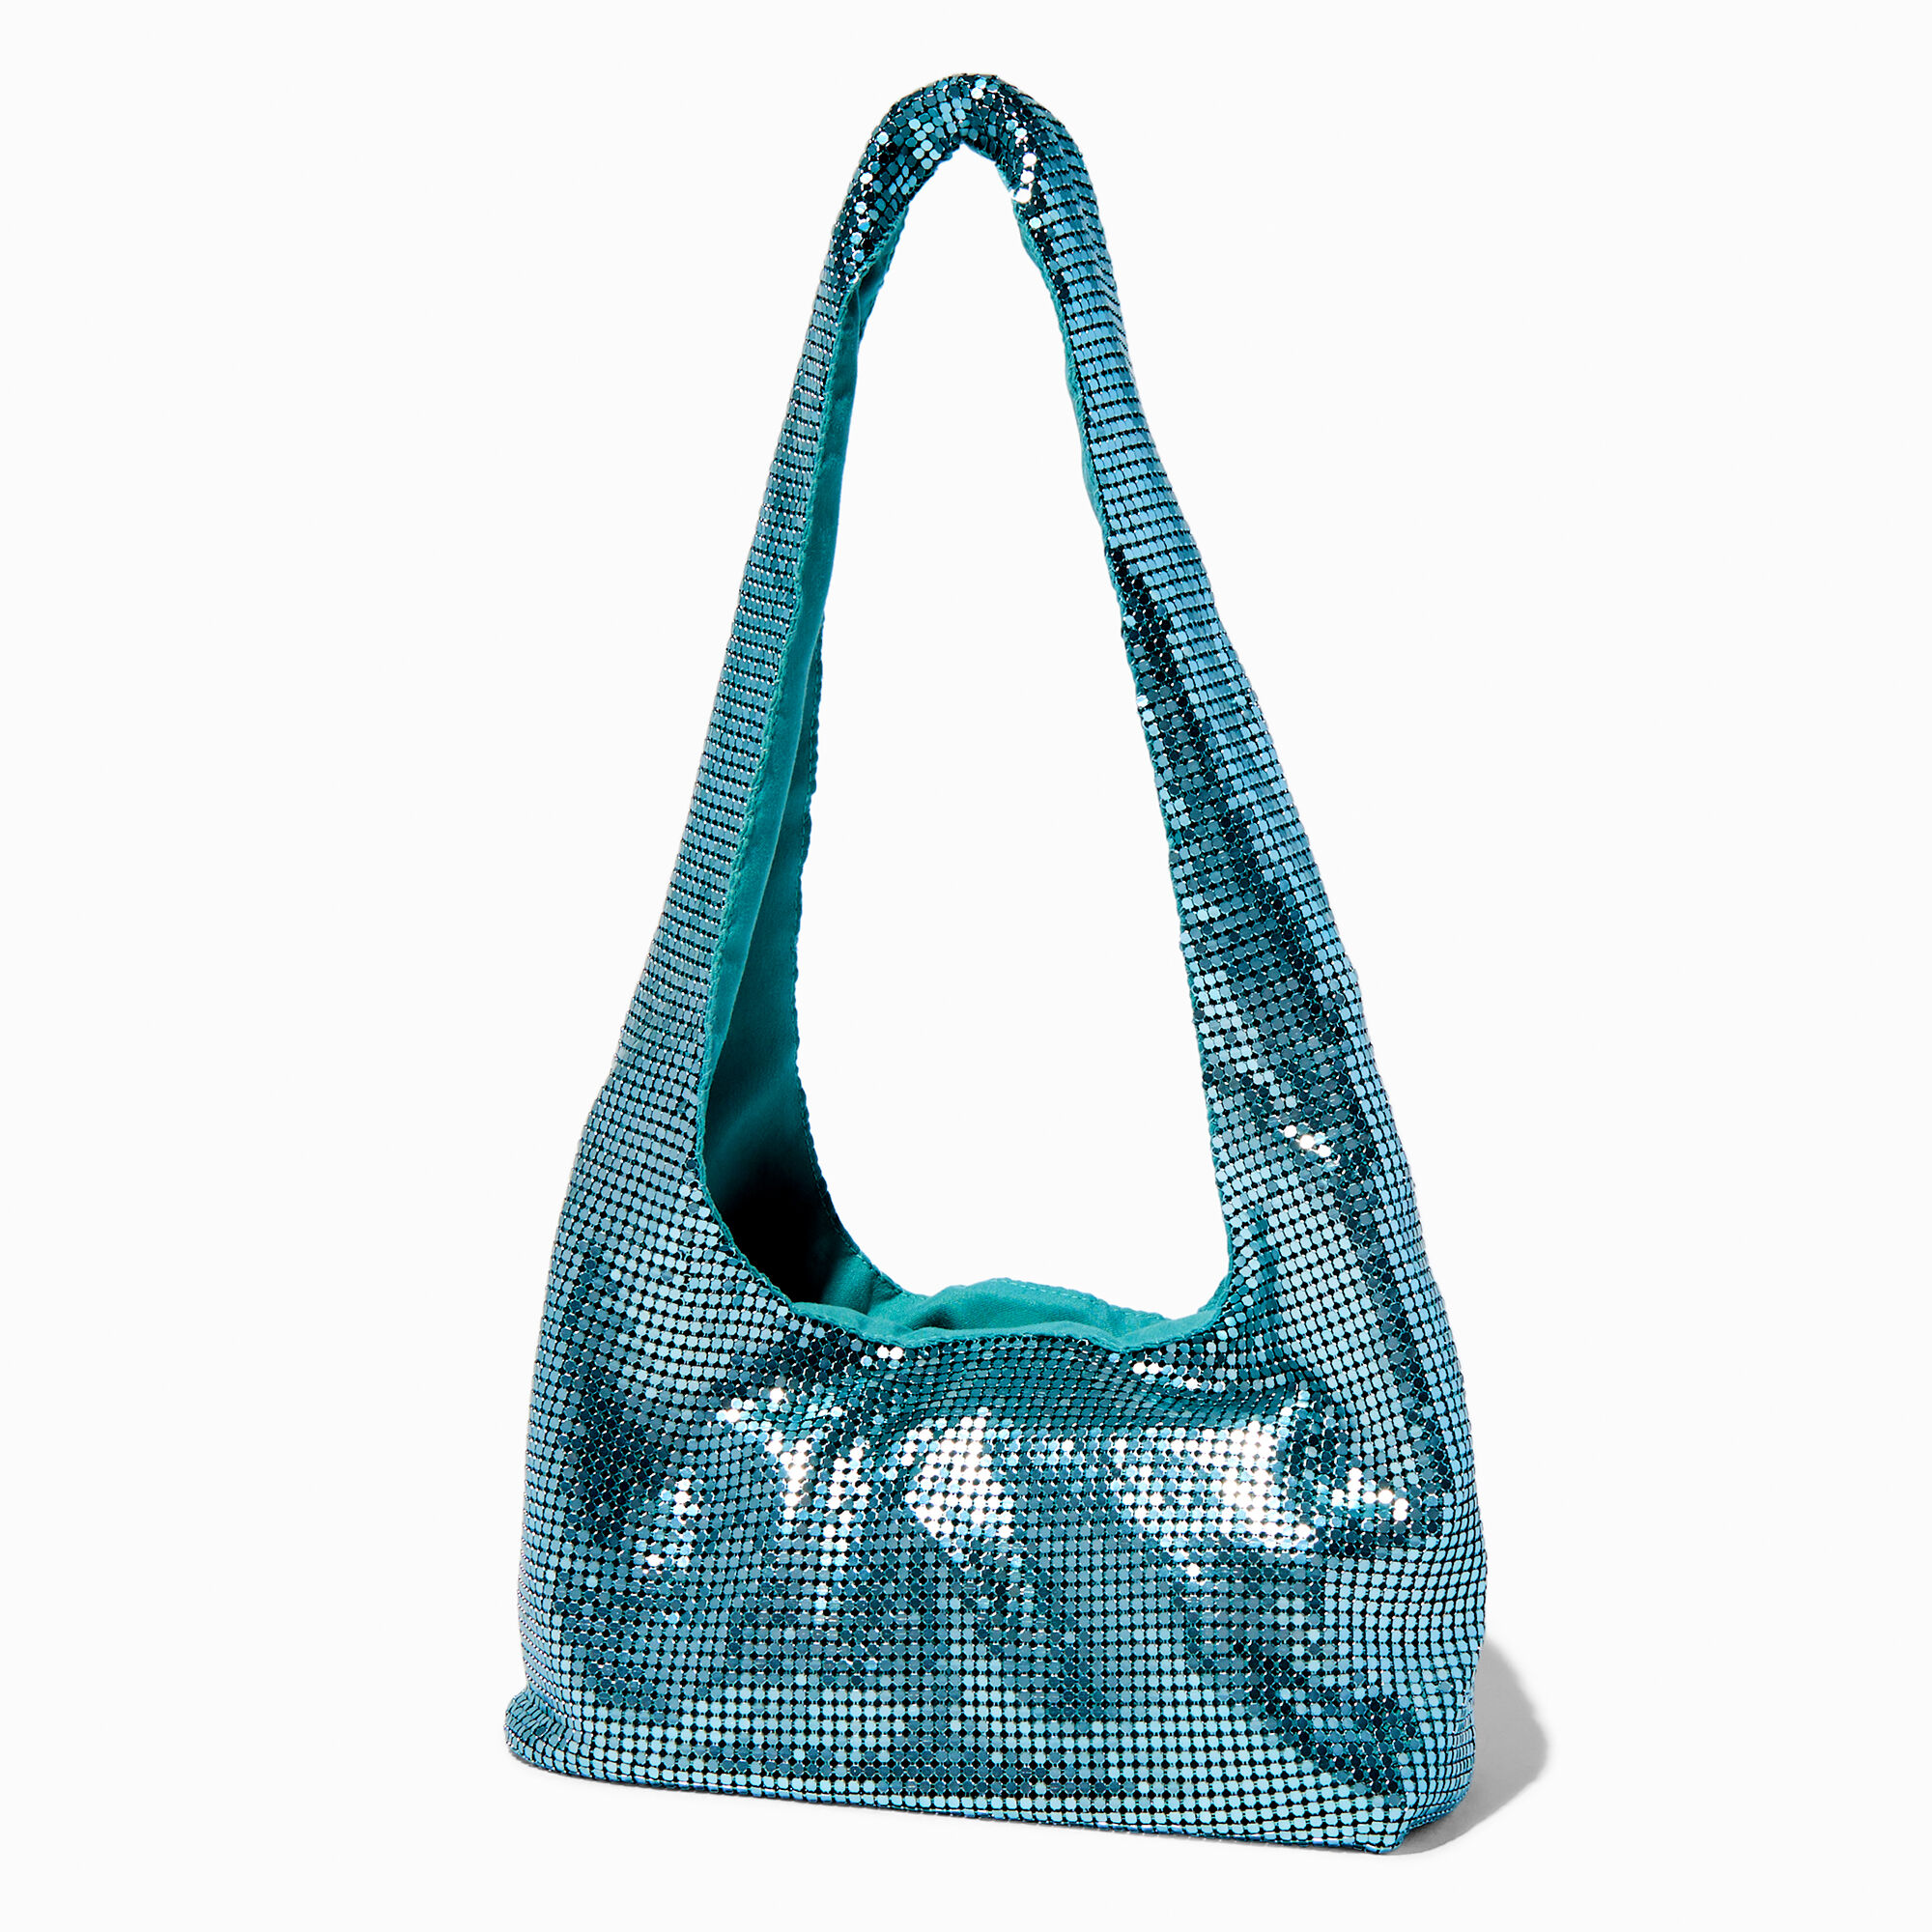 View Claires Sequin Slouchy Hobo Shoulder Bag Teal information